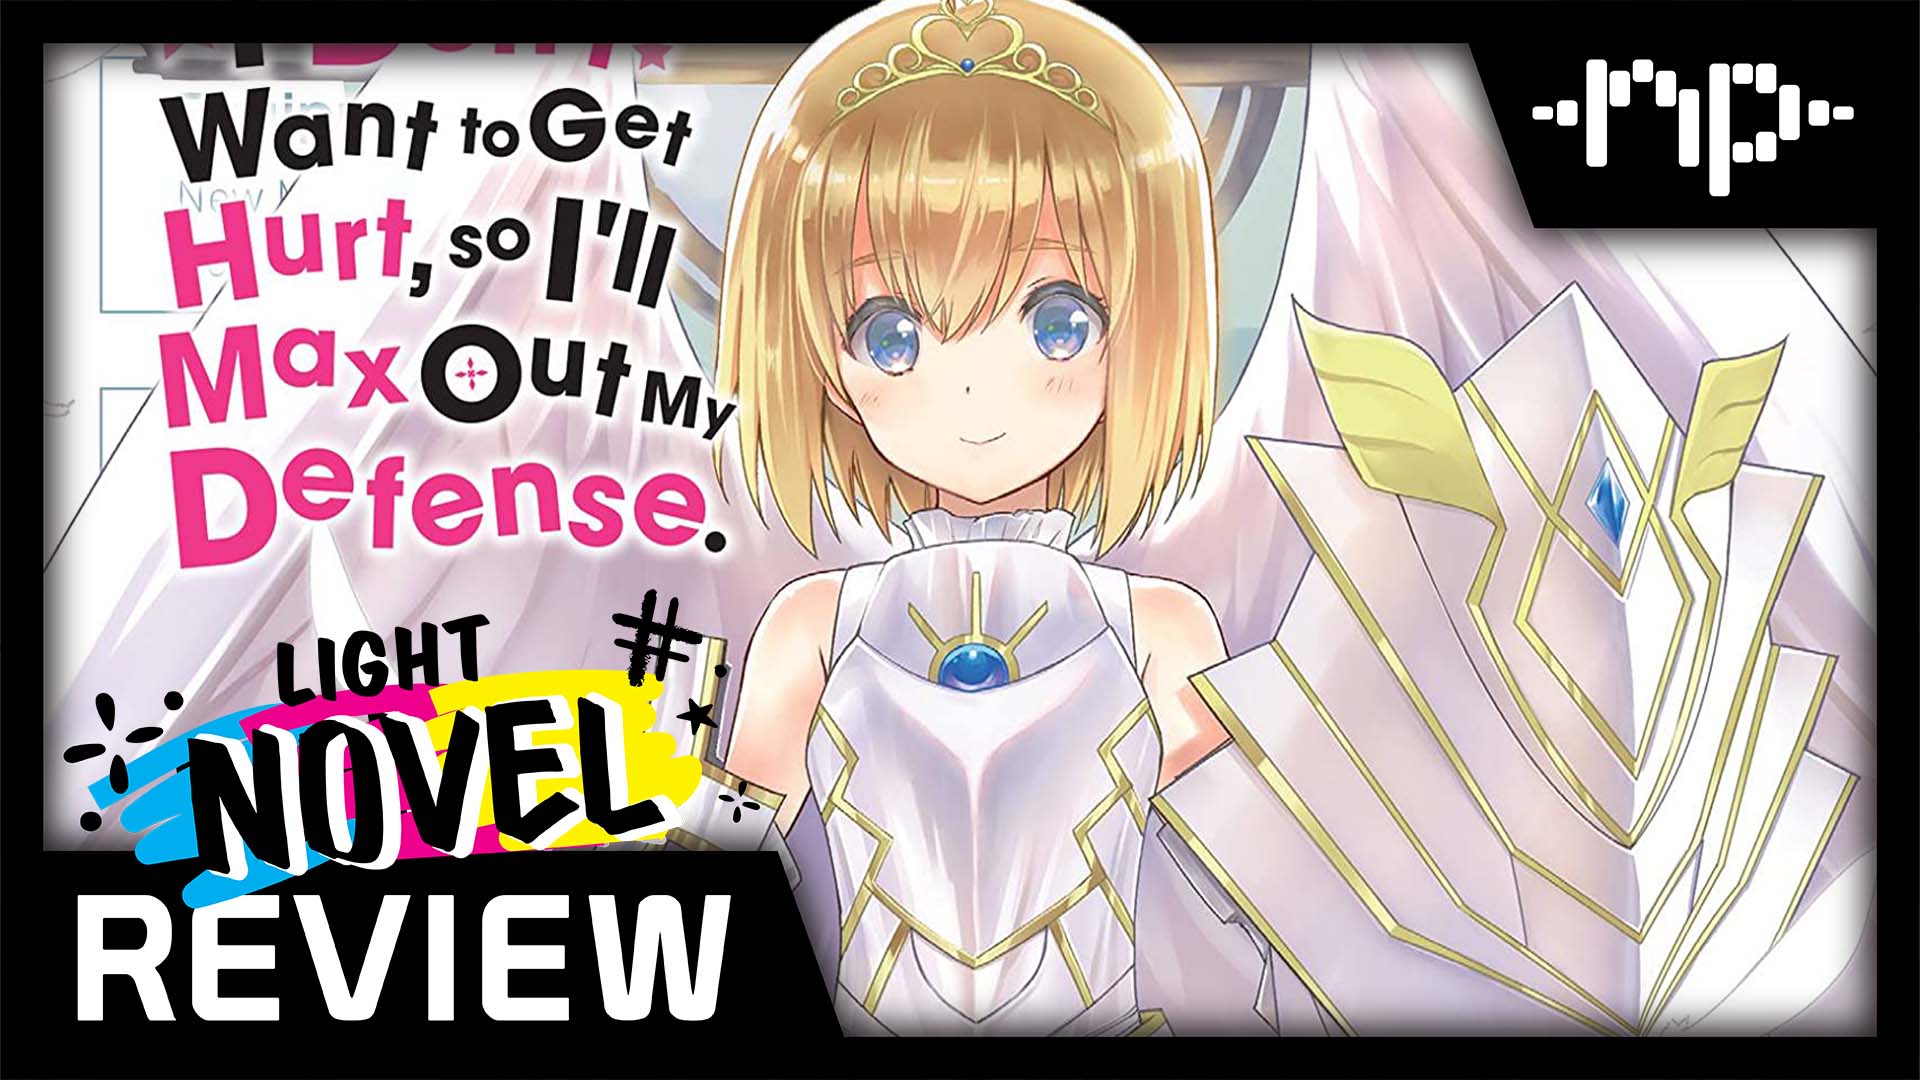 Bofuri I Dont Want To Get Hurt So Ill Max Out My Defense Vol 1 Light  Novel Review